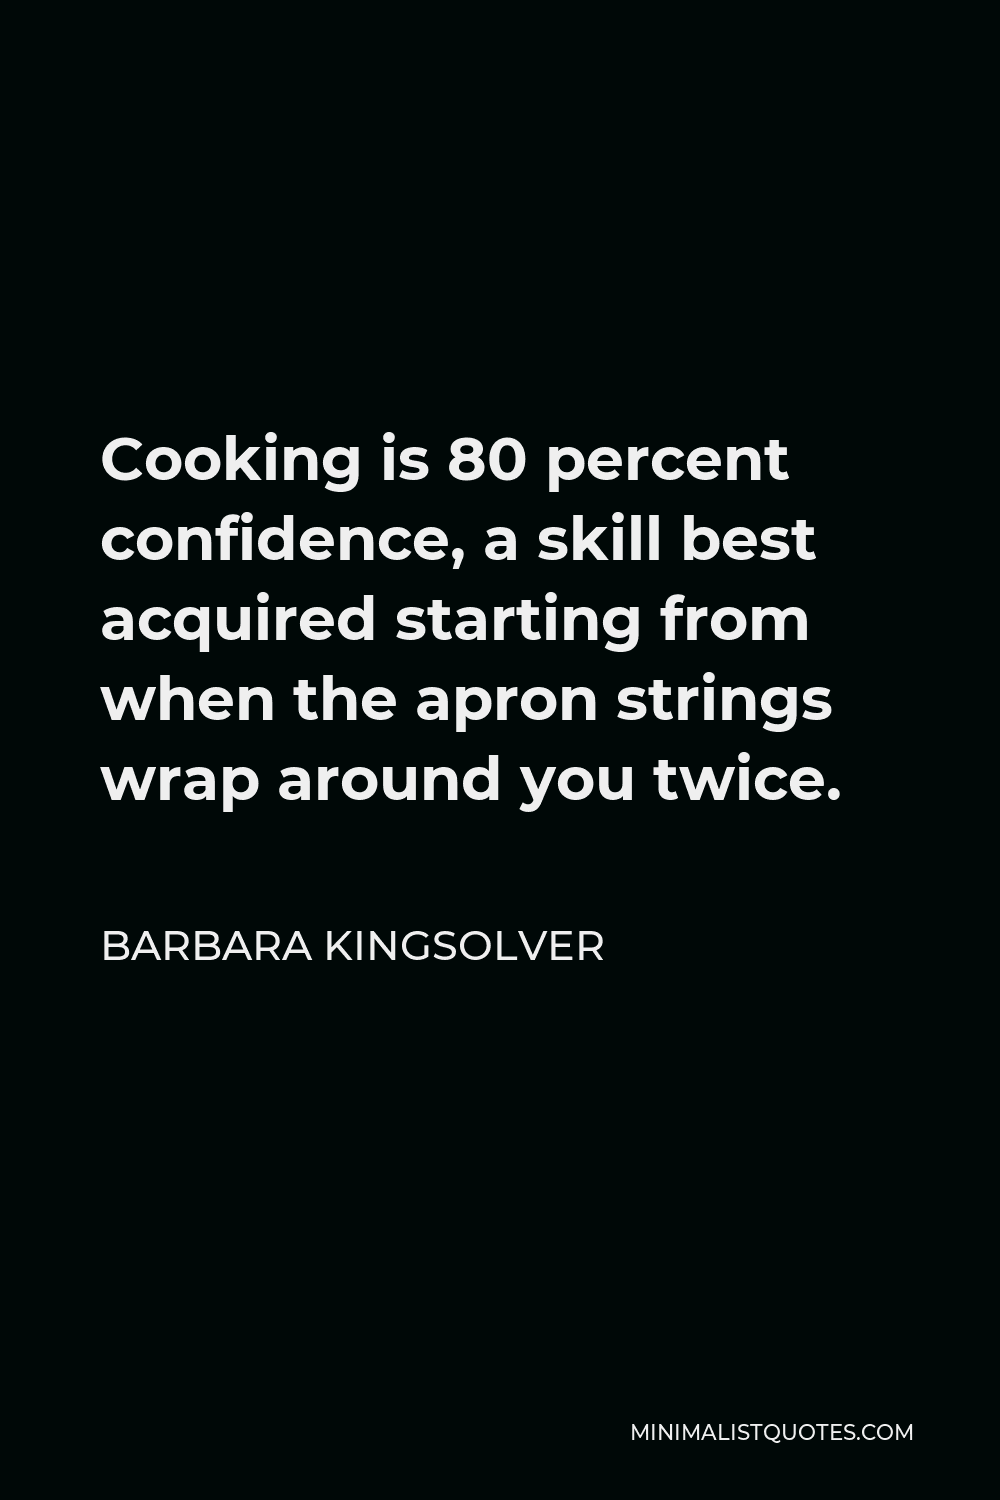 Barbara Kingsolver Quote - Cooking is 80 percent confidence, a skill best acquired starting from when the apron strings wrap around you twice.